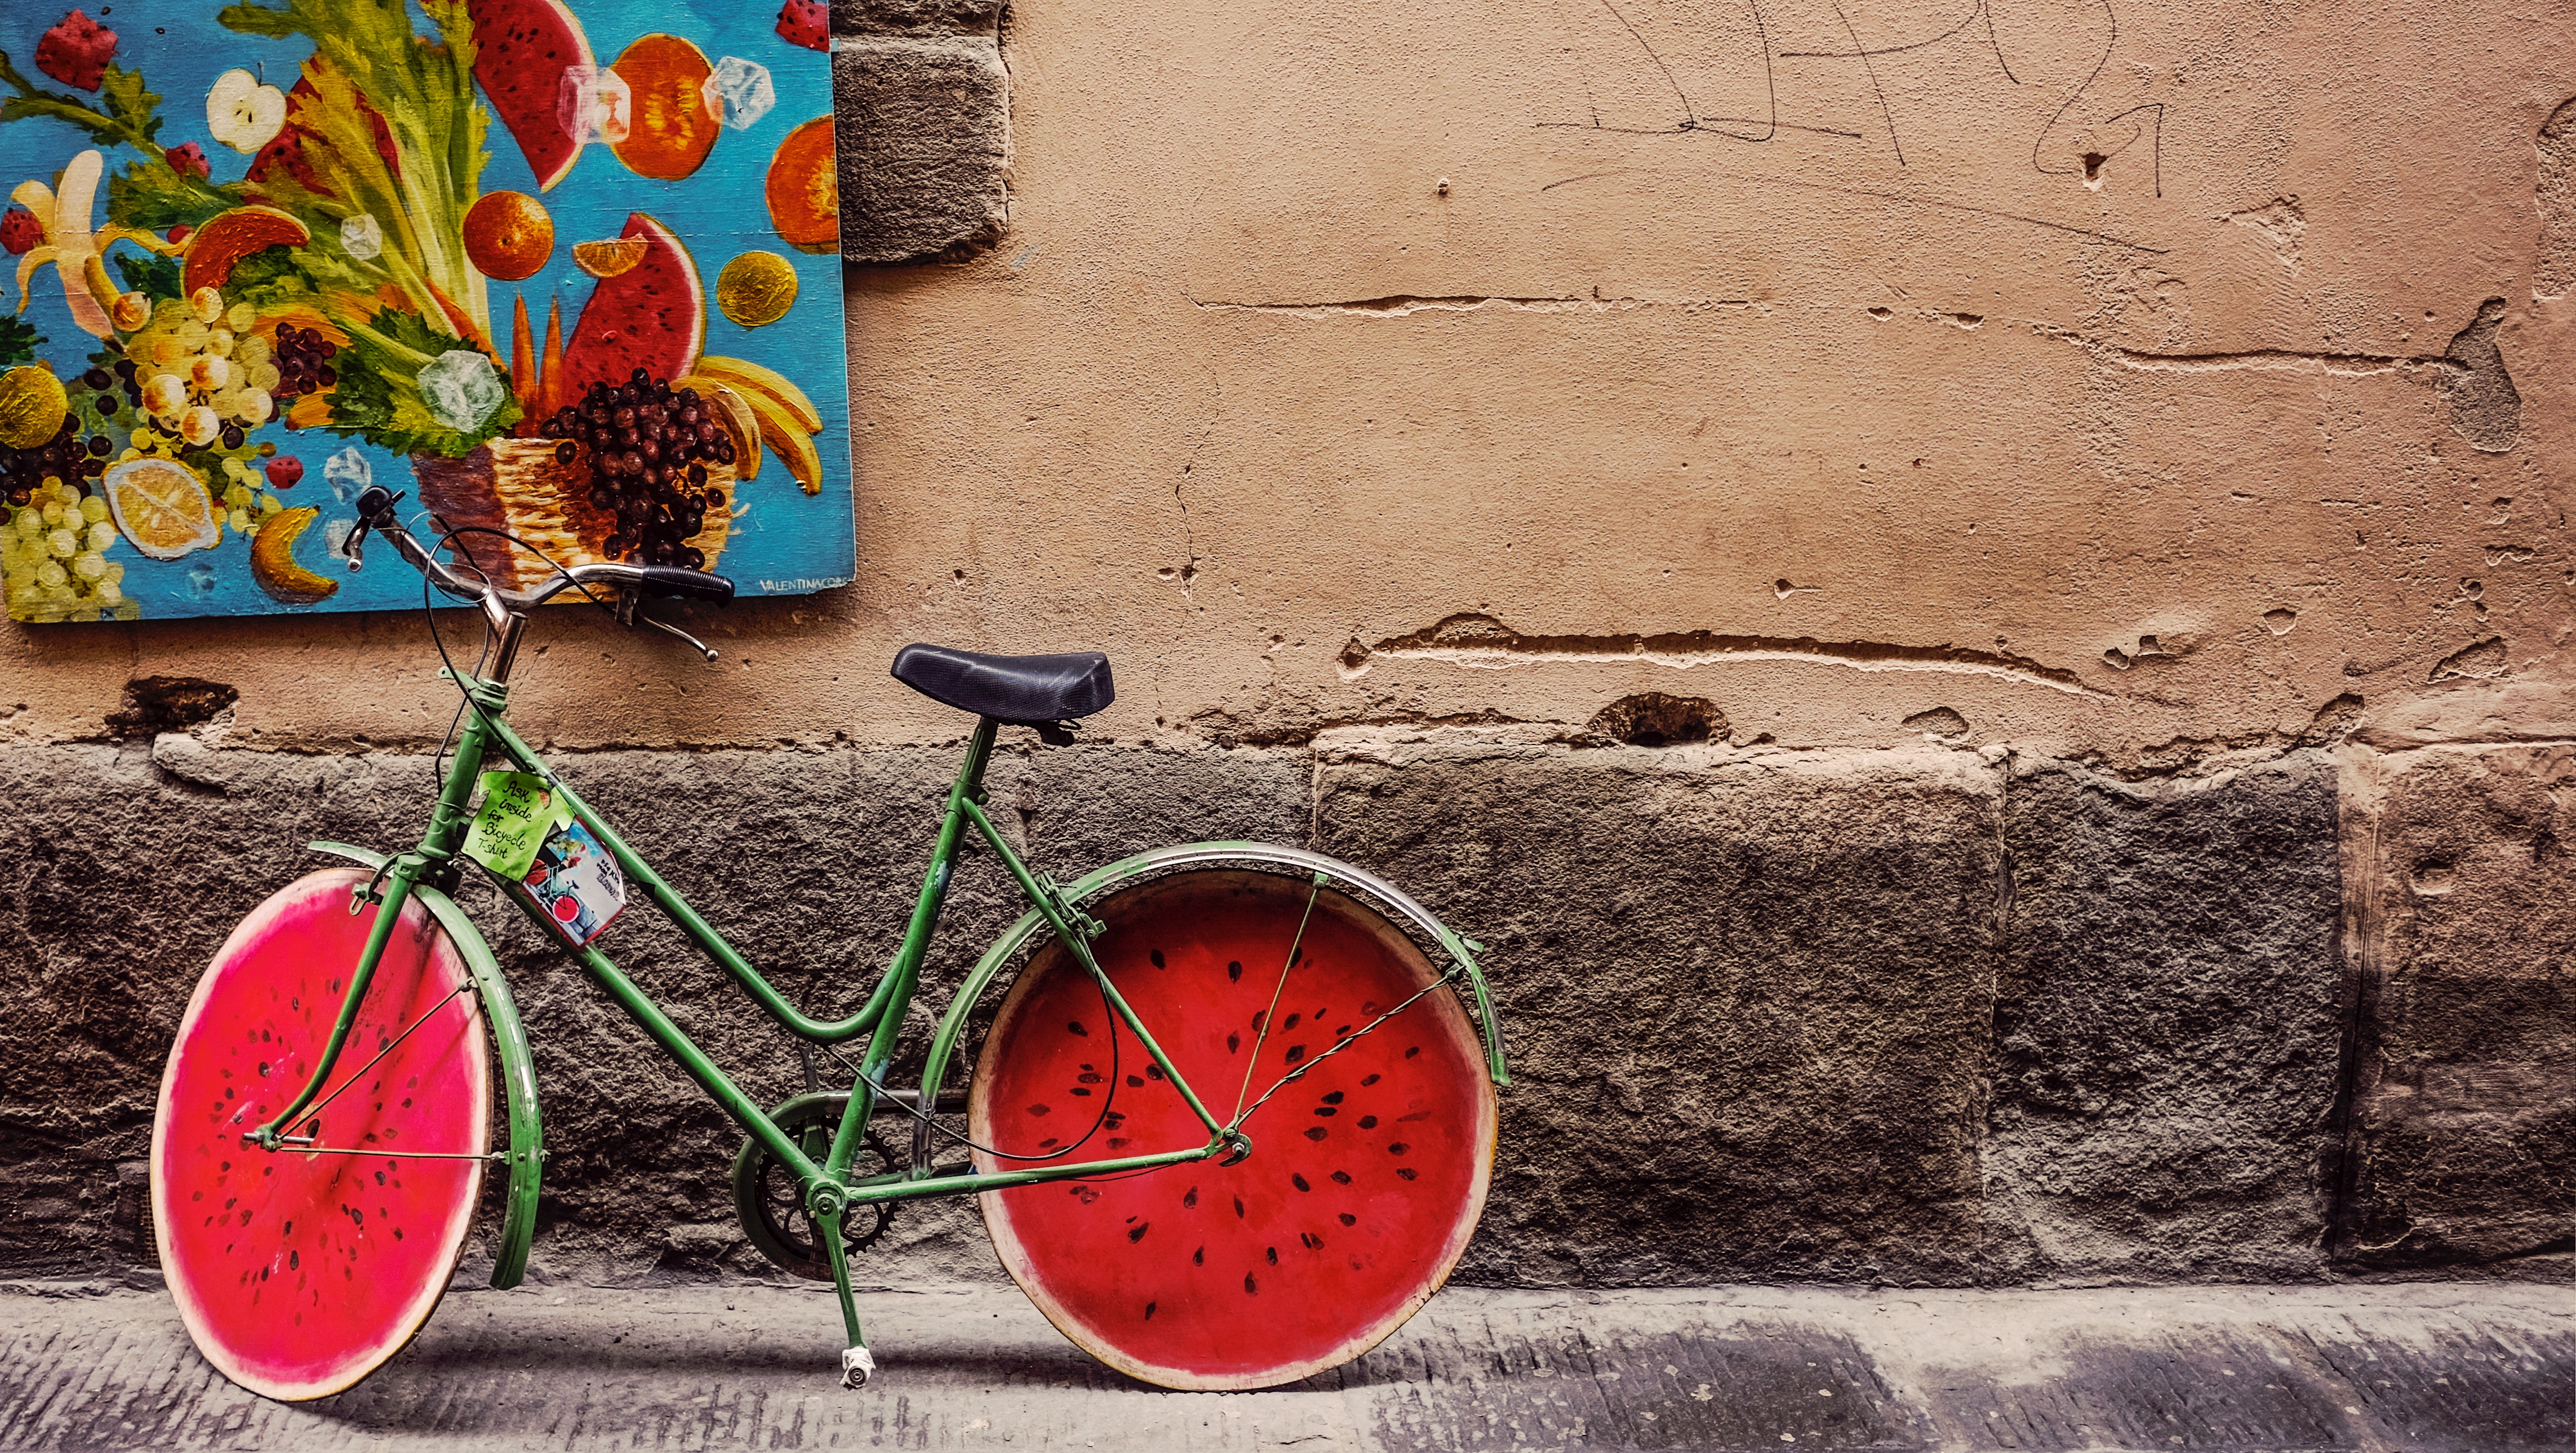 Wallpapers Italy watermelon fantastic on the desktop